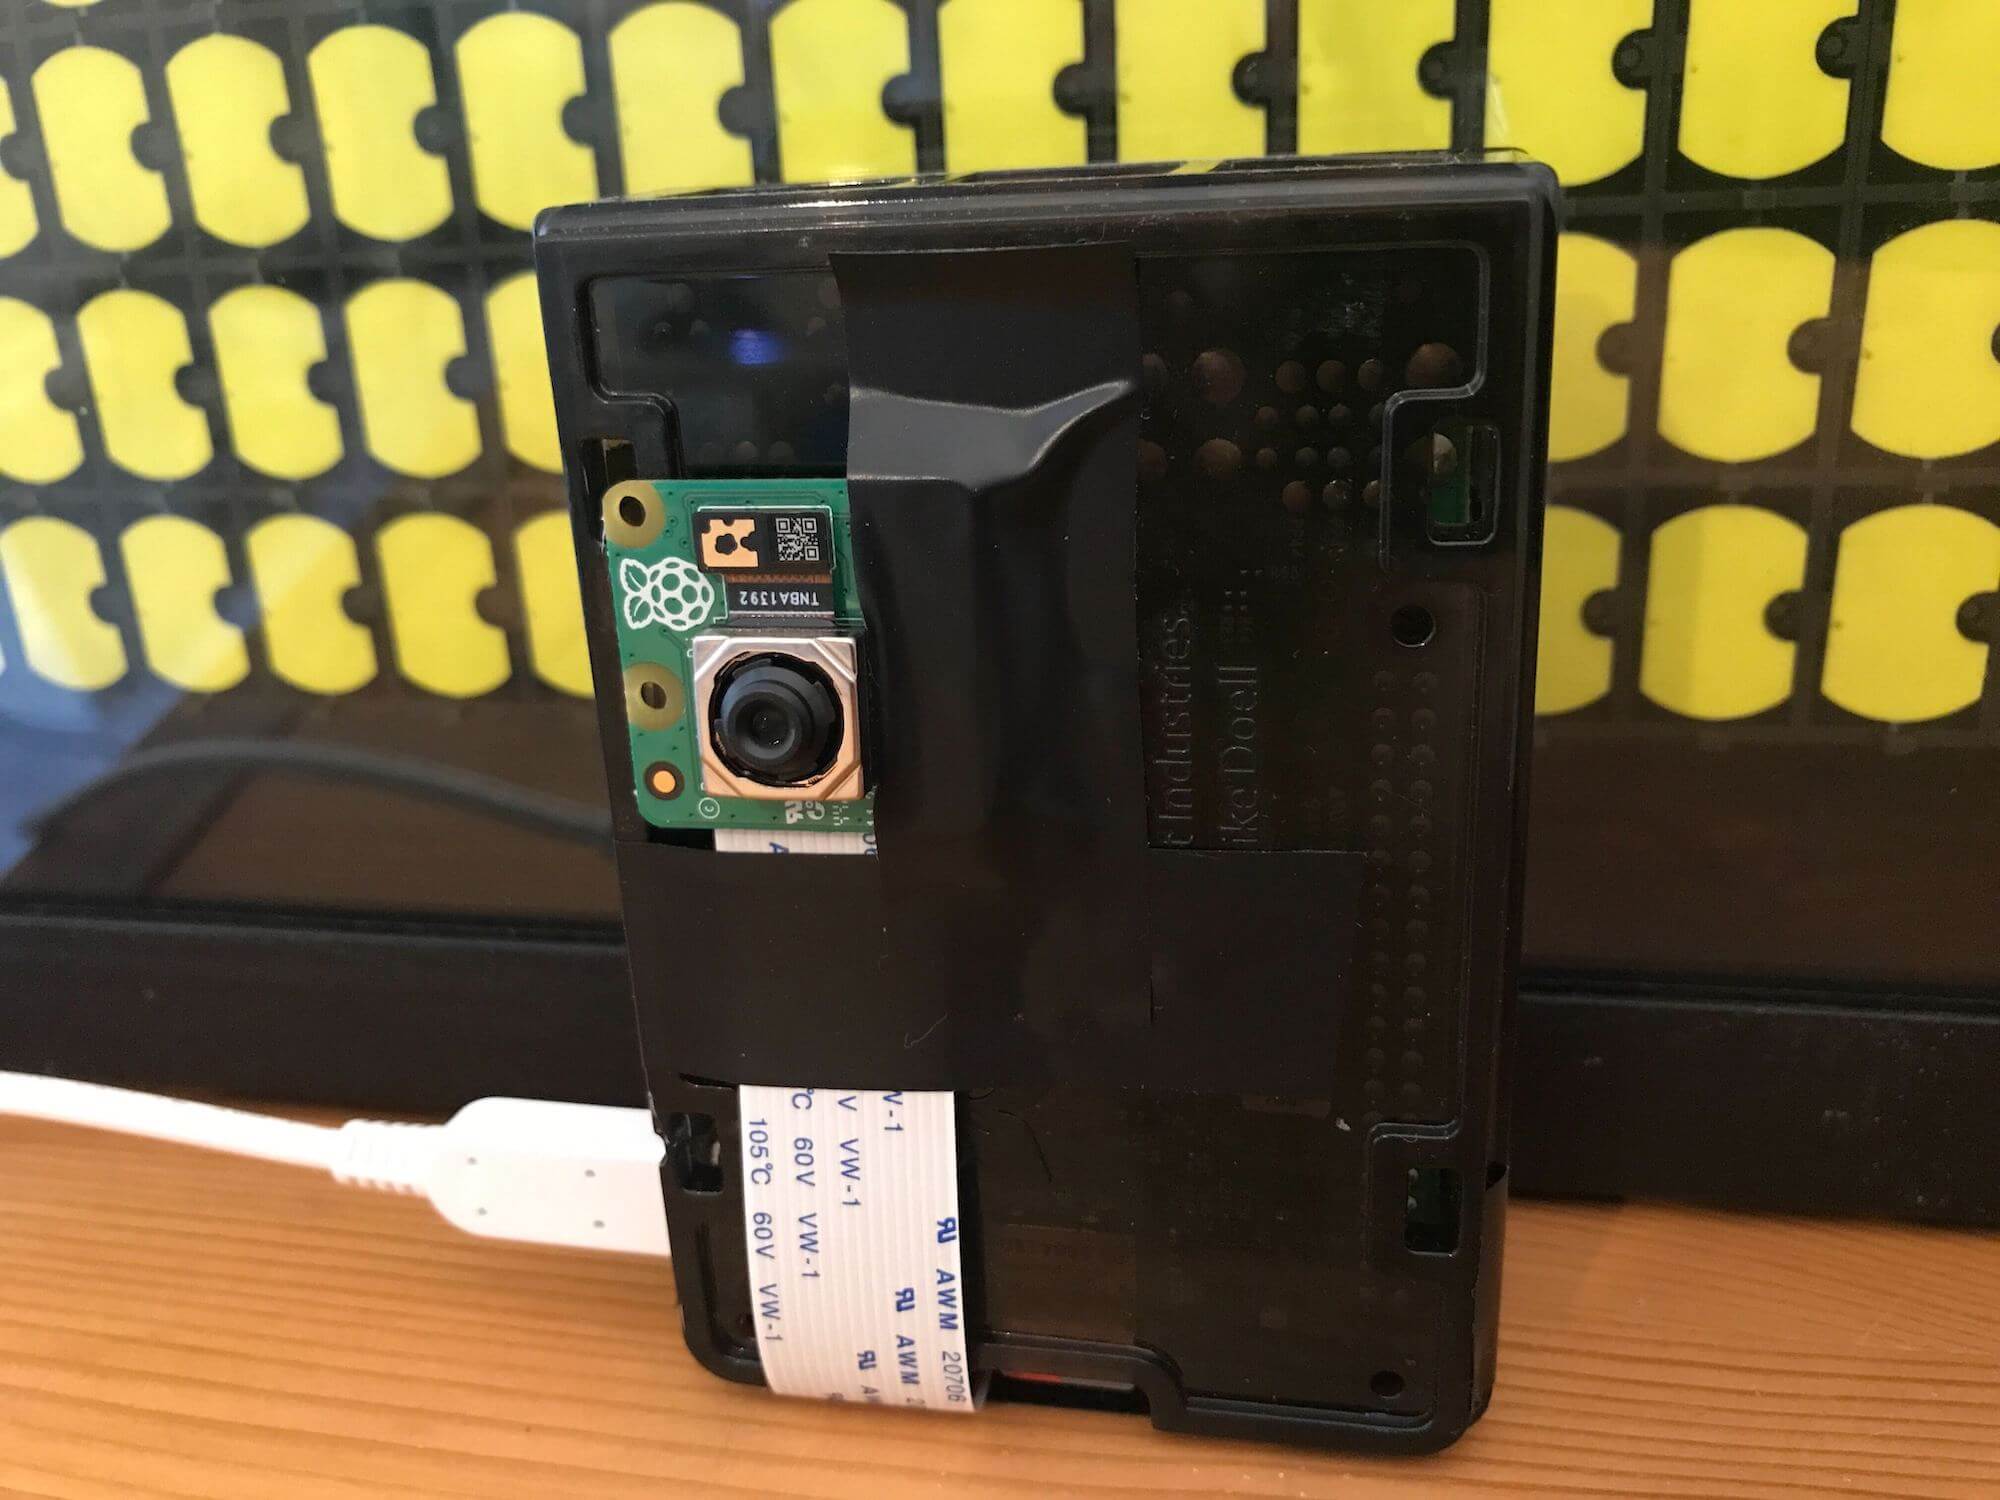 Raspberry Pi 3 with Camera Module attached